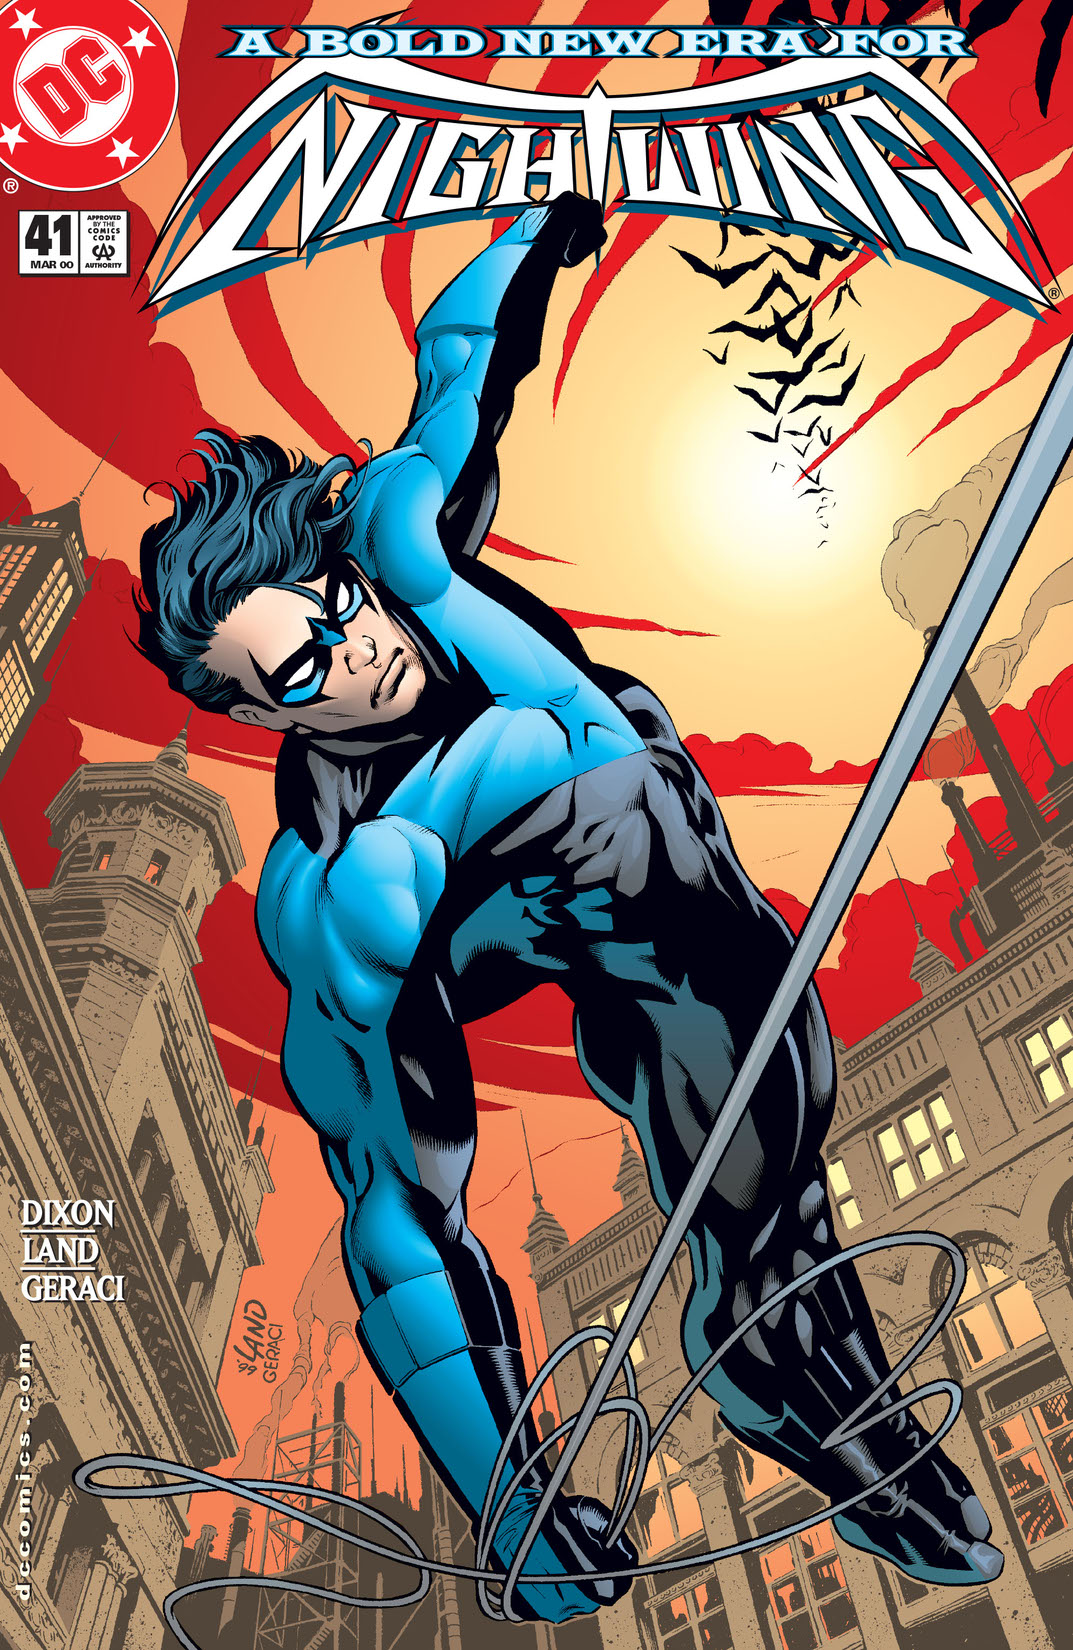 Nightwing (1996-) #41 preview images